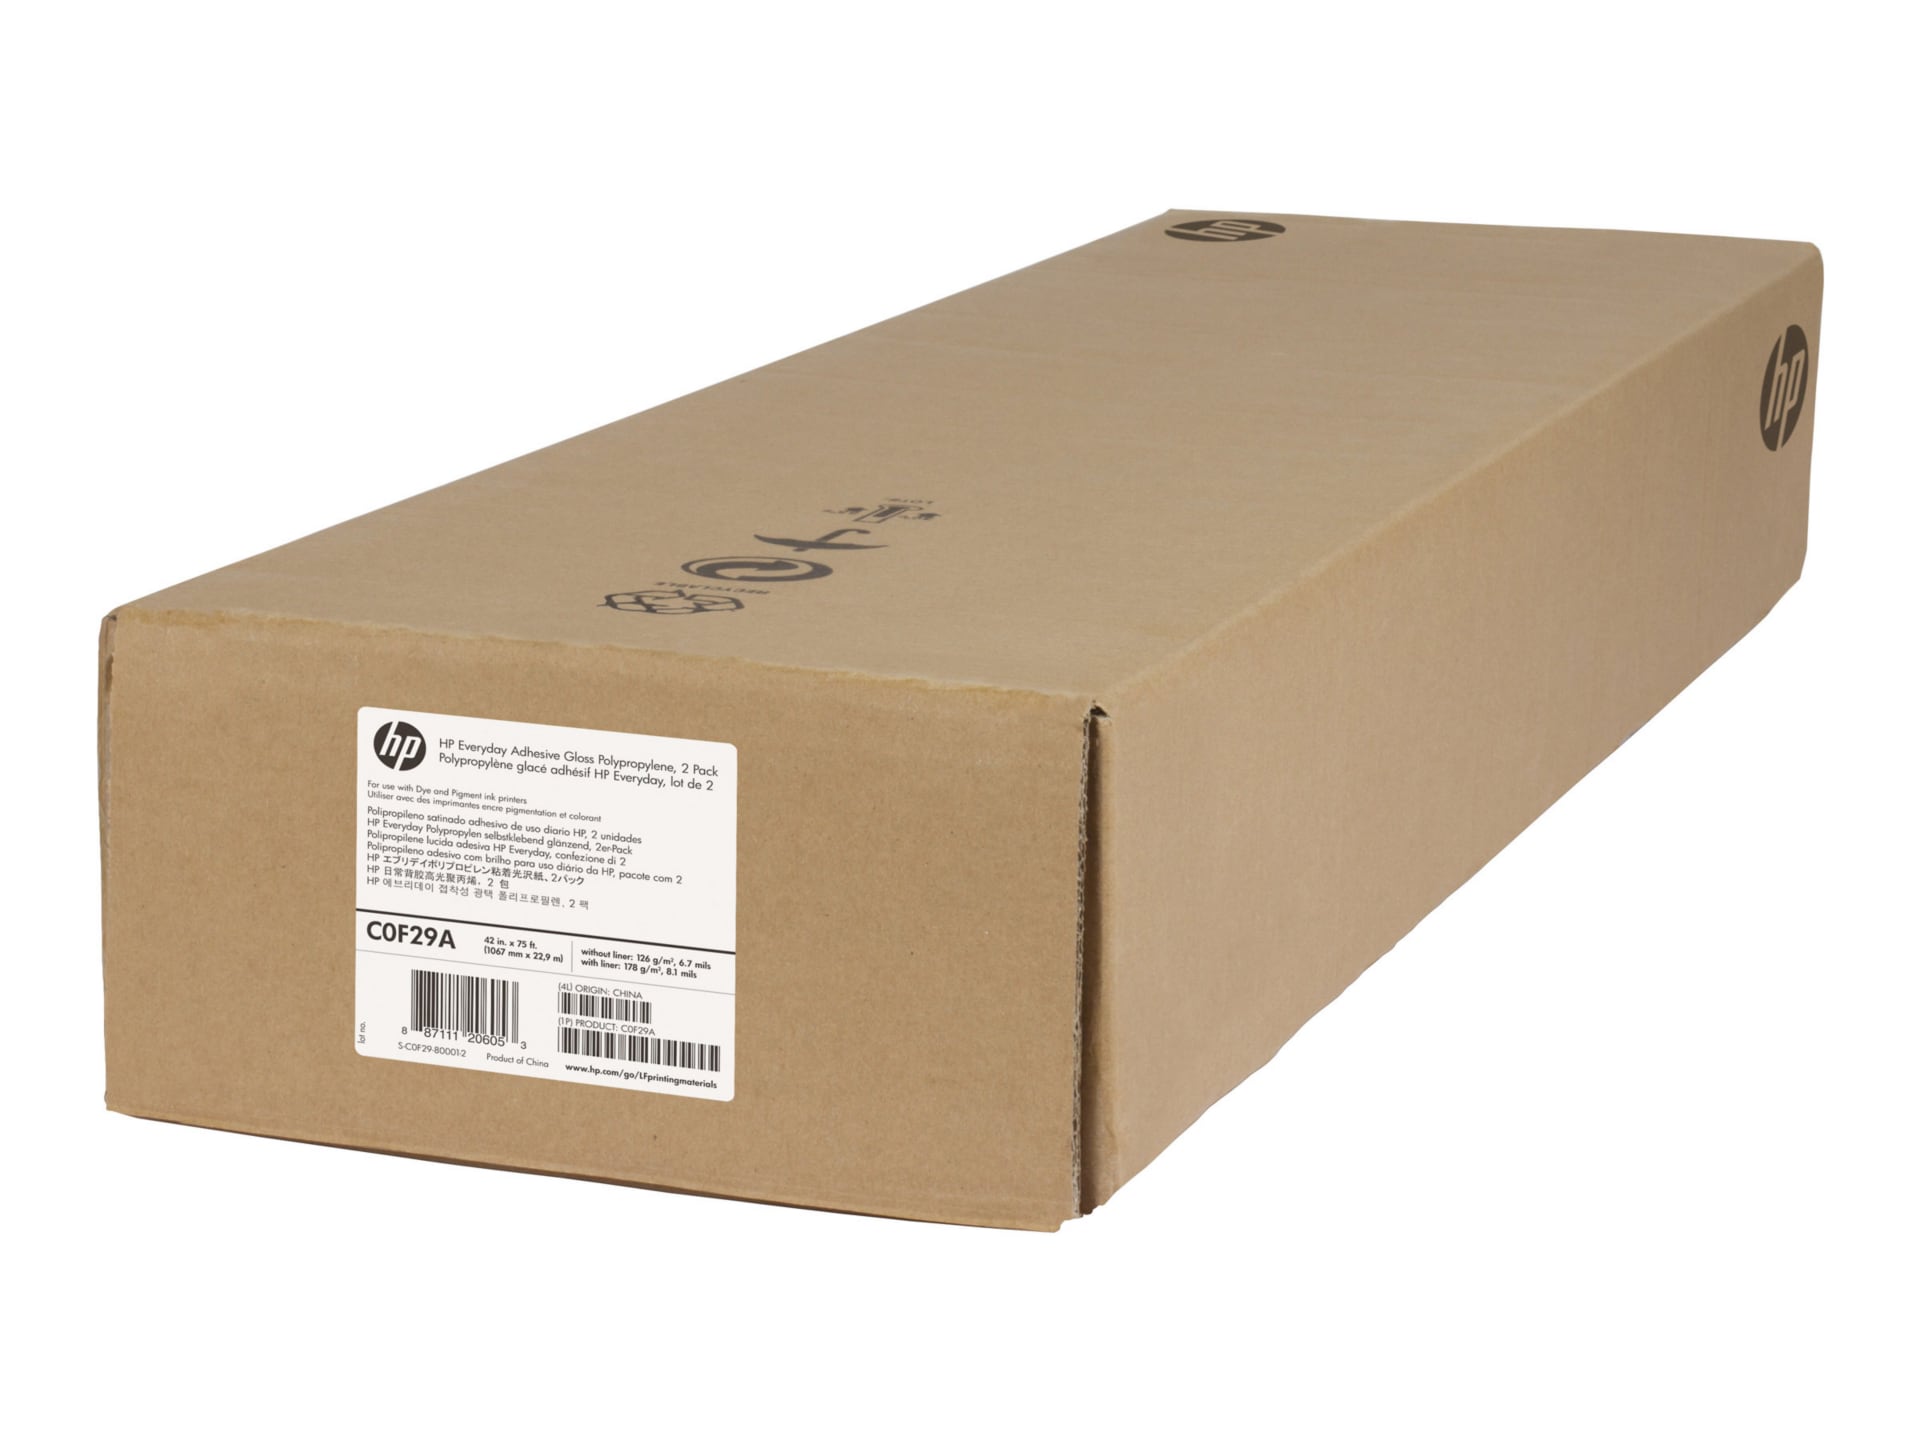 HP 2-Pack Everyday Adhesive Gloss Polypropylene-1067 mm x 22,9 m (42 in x 75 ft)